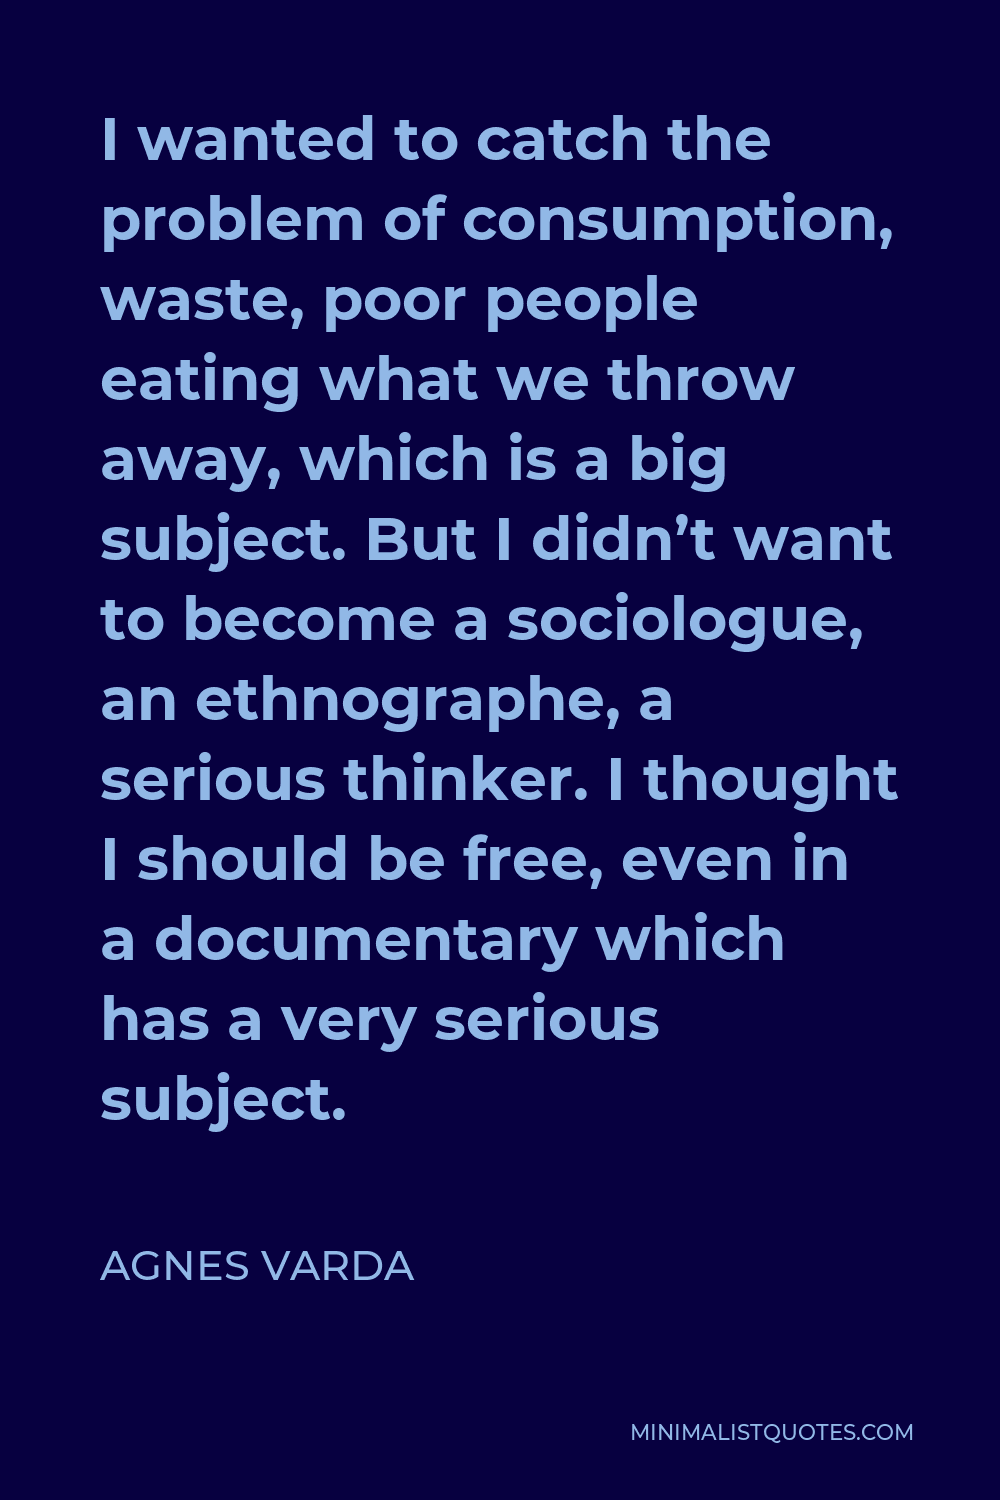 Agnes Varda Quote - I wanted to catch the problem of consumption, waste, poor people eating what we throw away, which is a big subject. But I didn’t want to become a sociologue, an ethnographe, a serious thinker. I thought I should be free, even in a documentary which has a very serious subject.